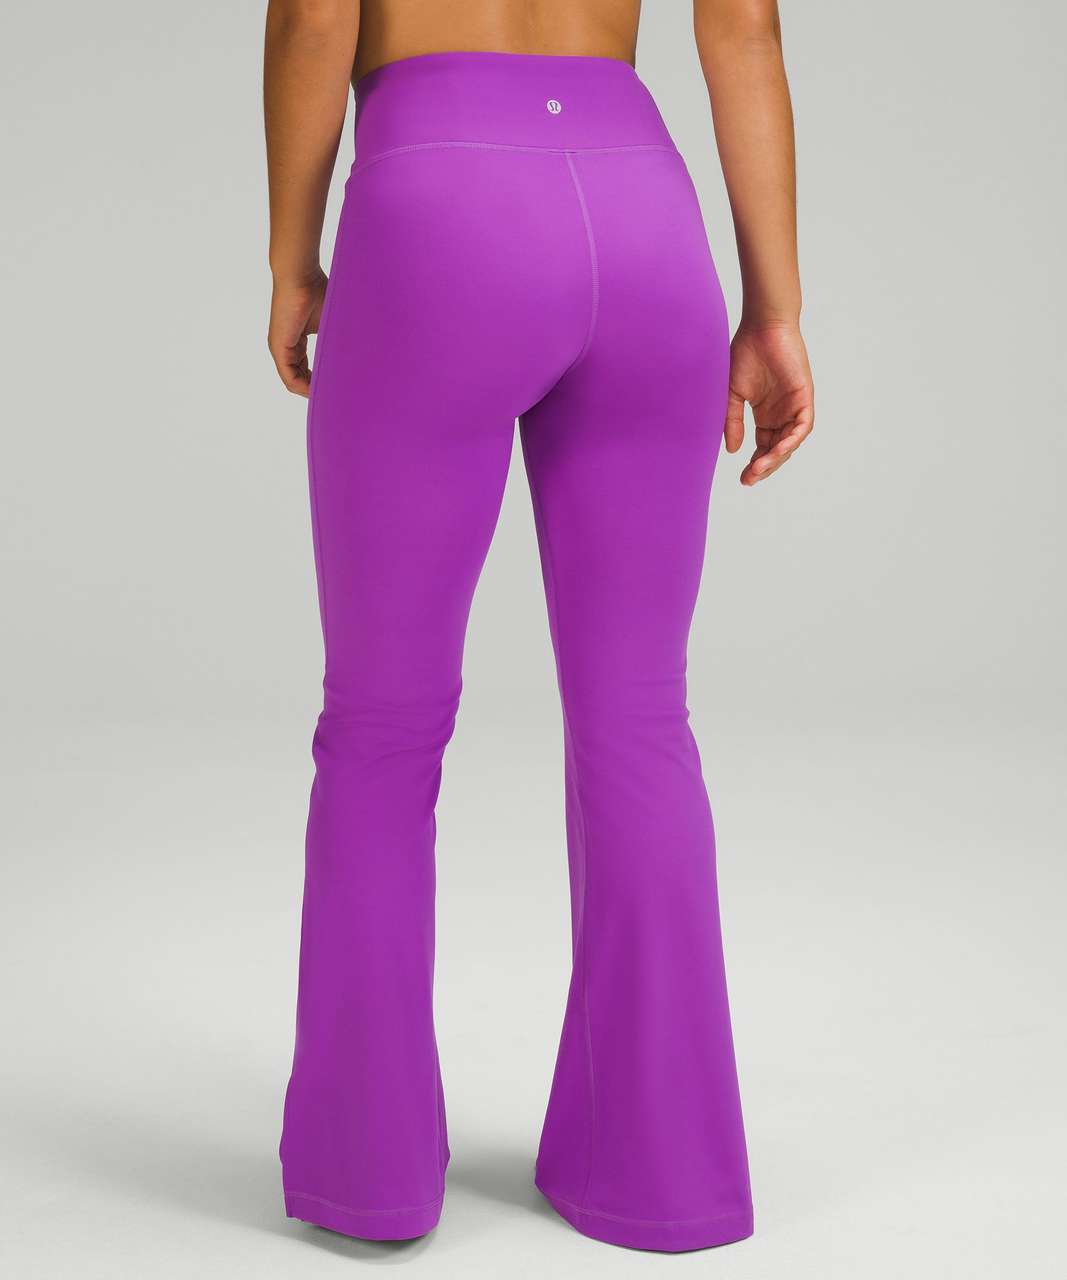 Also saw Groove Pants in Magenta Purple & Dark Olive in store